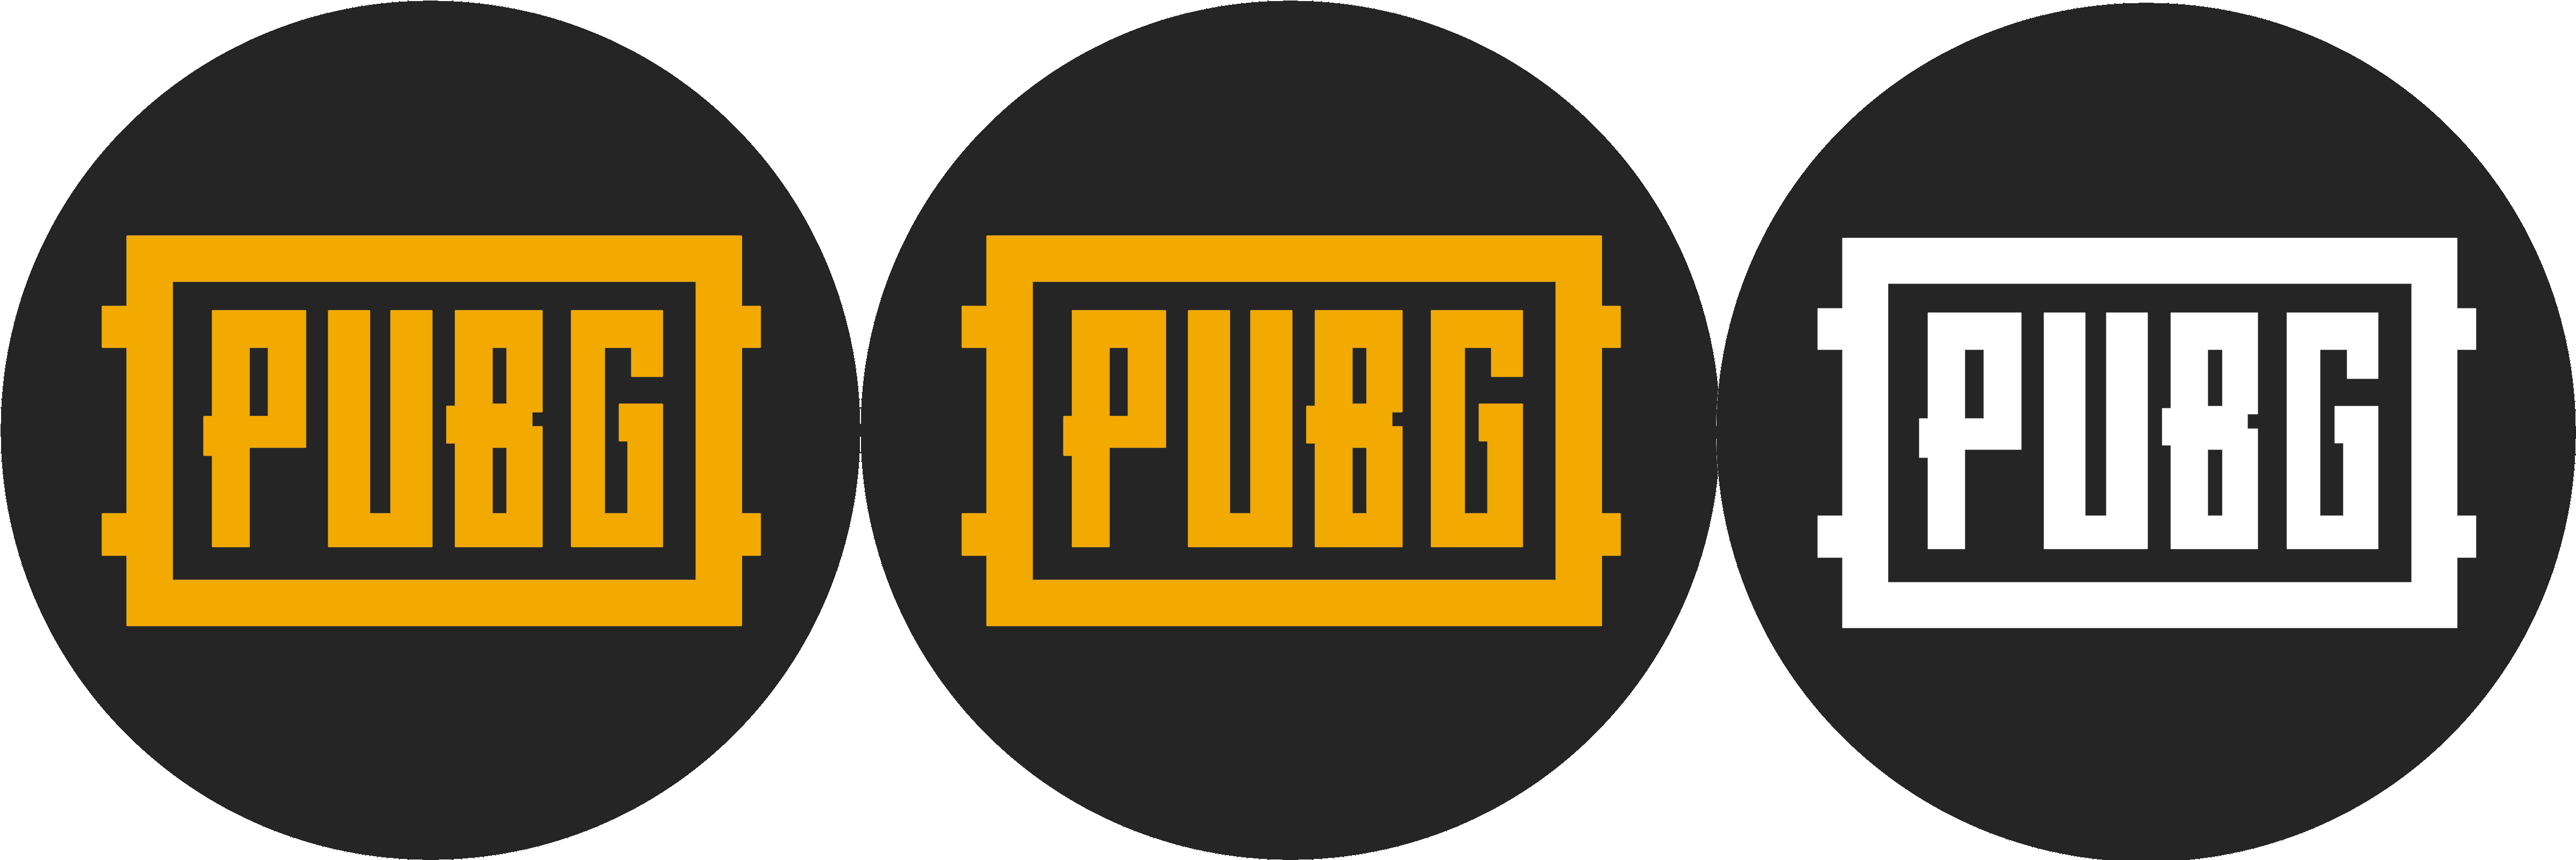 Playerunknown’s Battlegrounds Logo PNG Image Background